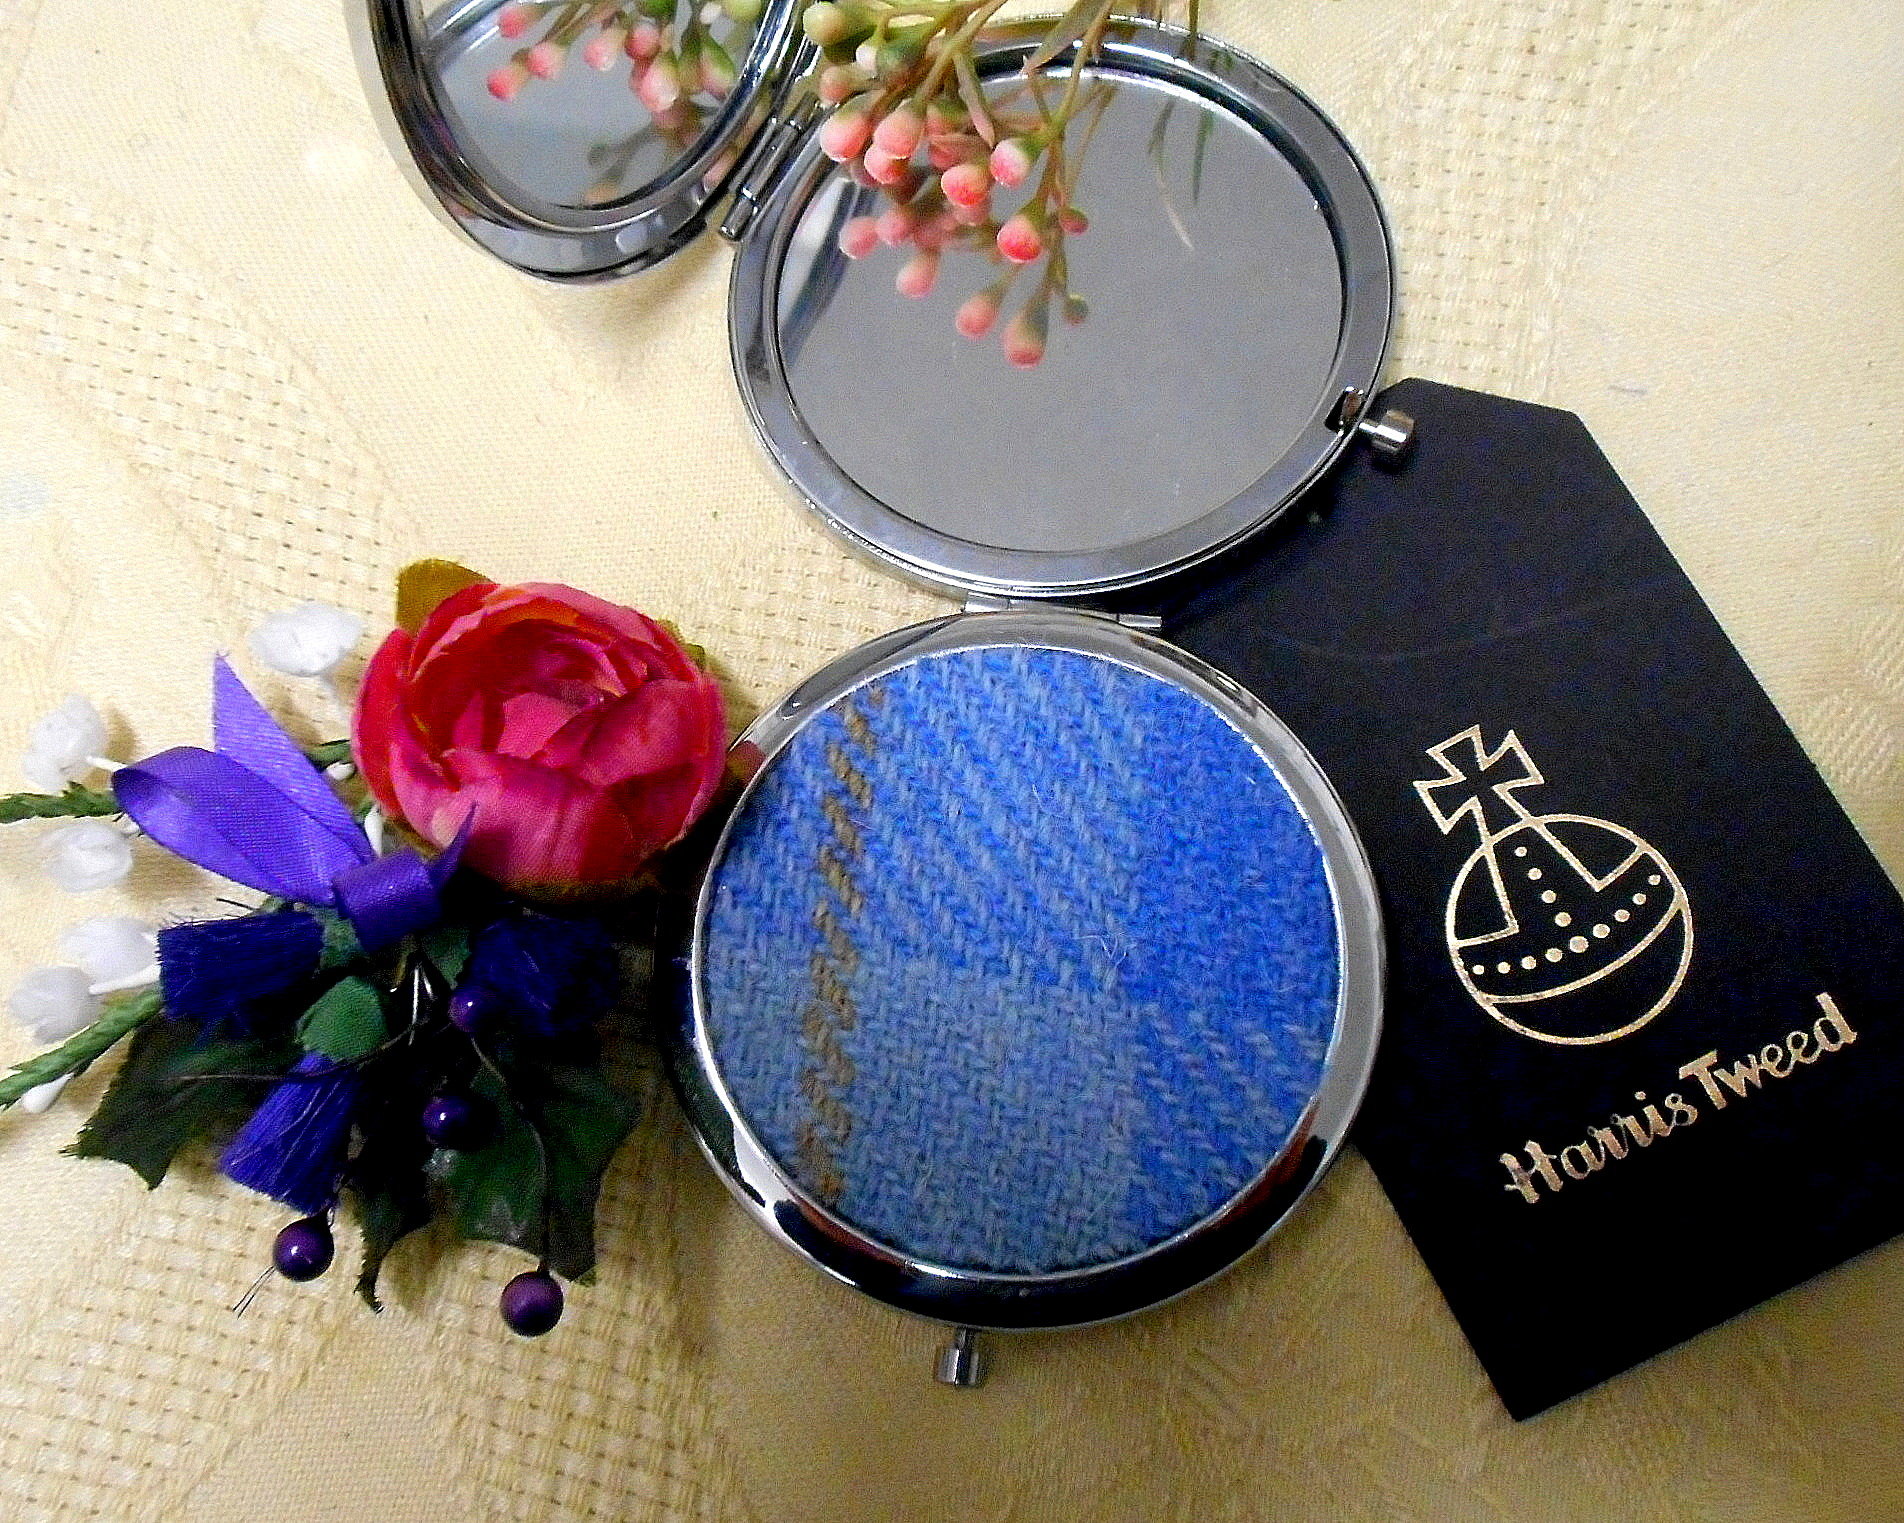 Baby blue plaid Harris Tweed compact mirror  womens gift for Mother, sister, best friend, handbag or pocker accessory, made in Scotland UK